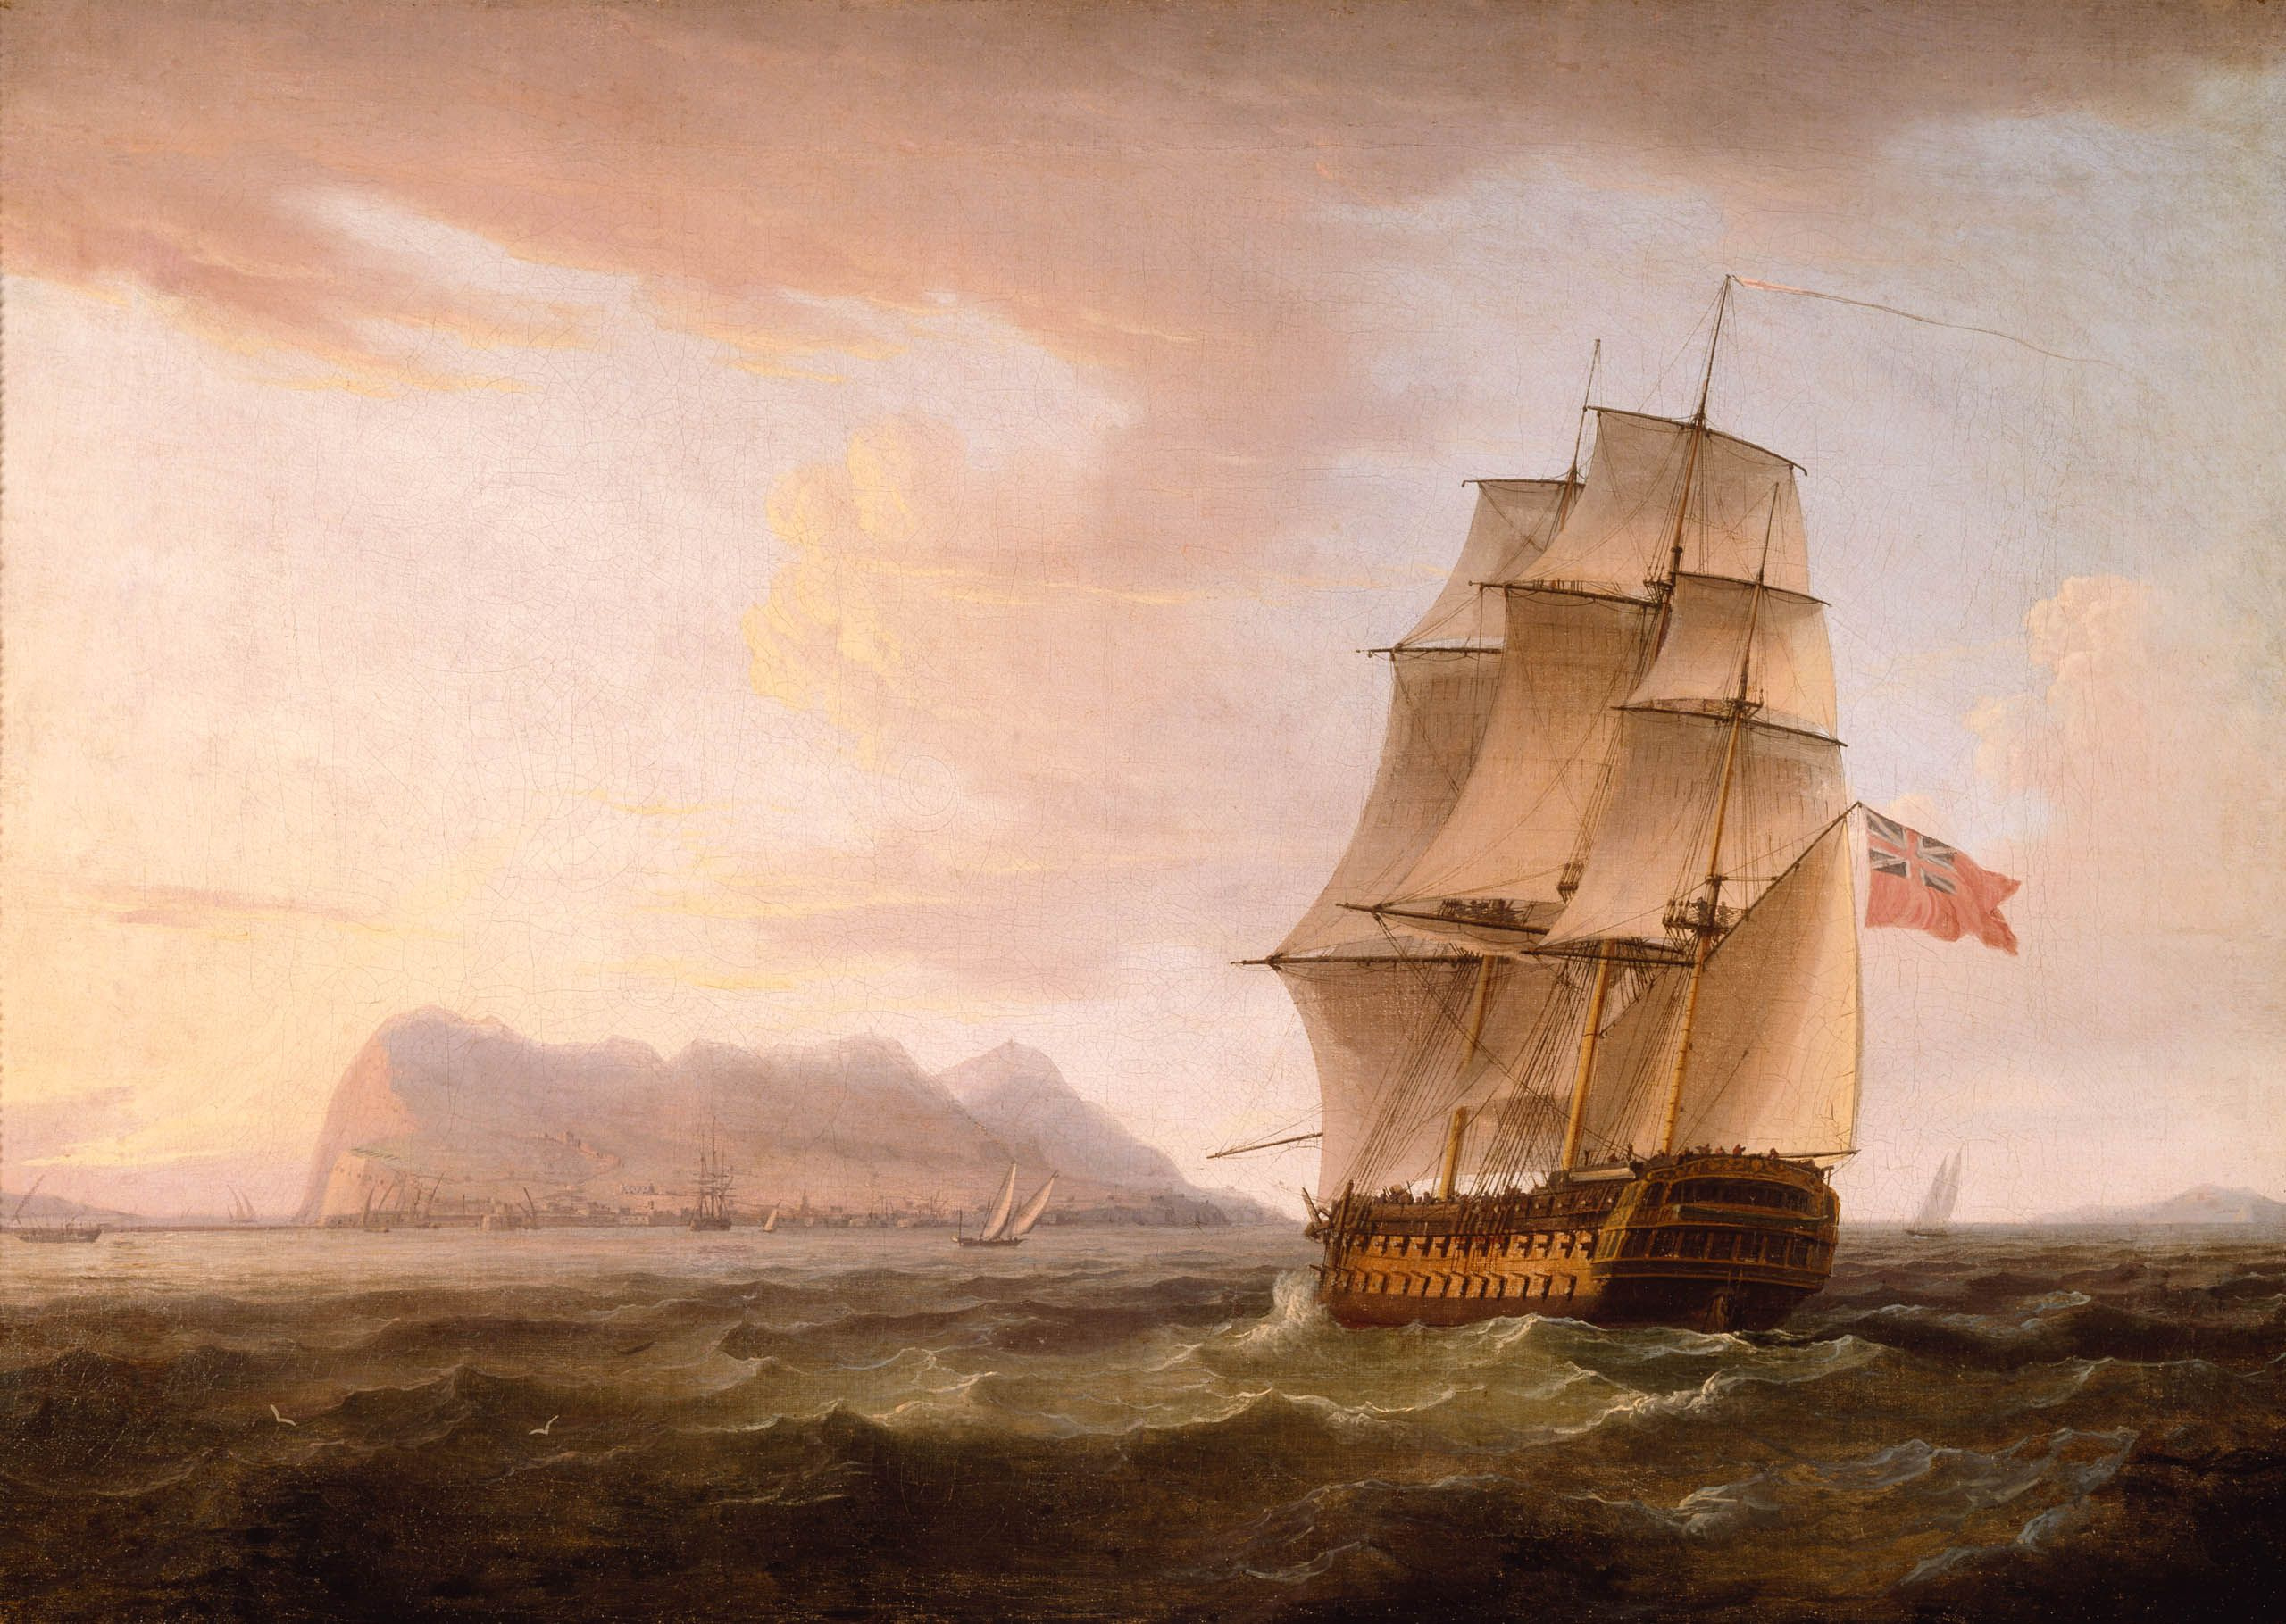 A British Man of War before the Rock of Gibraltar by Thomas Whitcombe